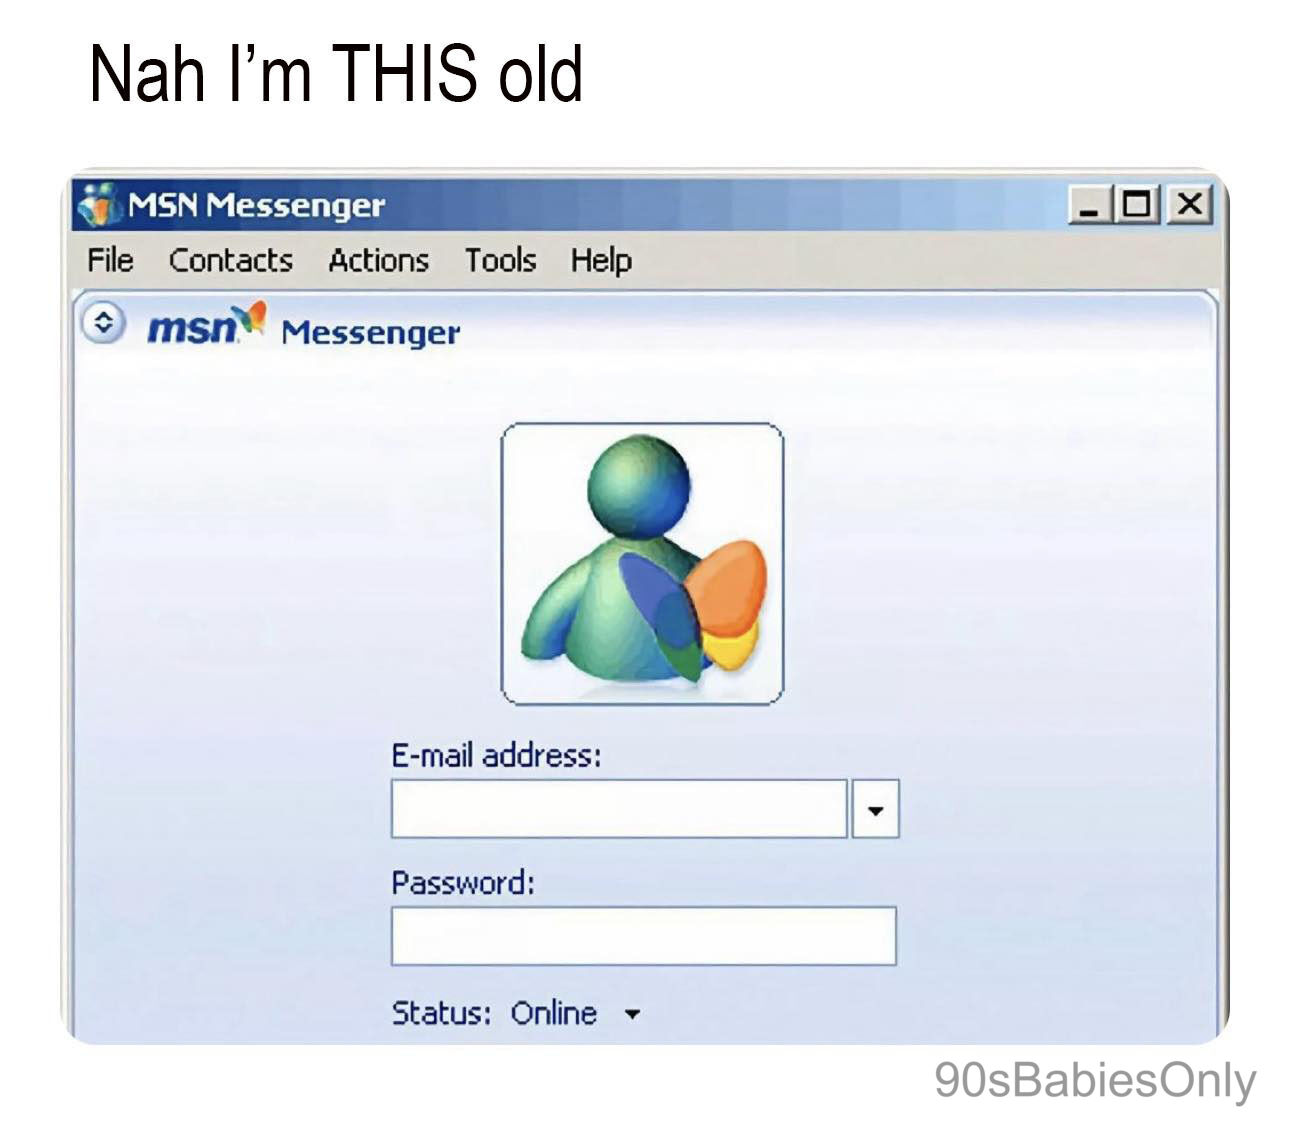 The MSN Messenger login screen.

Text above image: Nah I'm THIS old